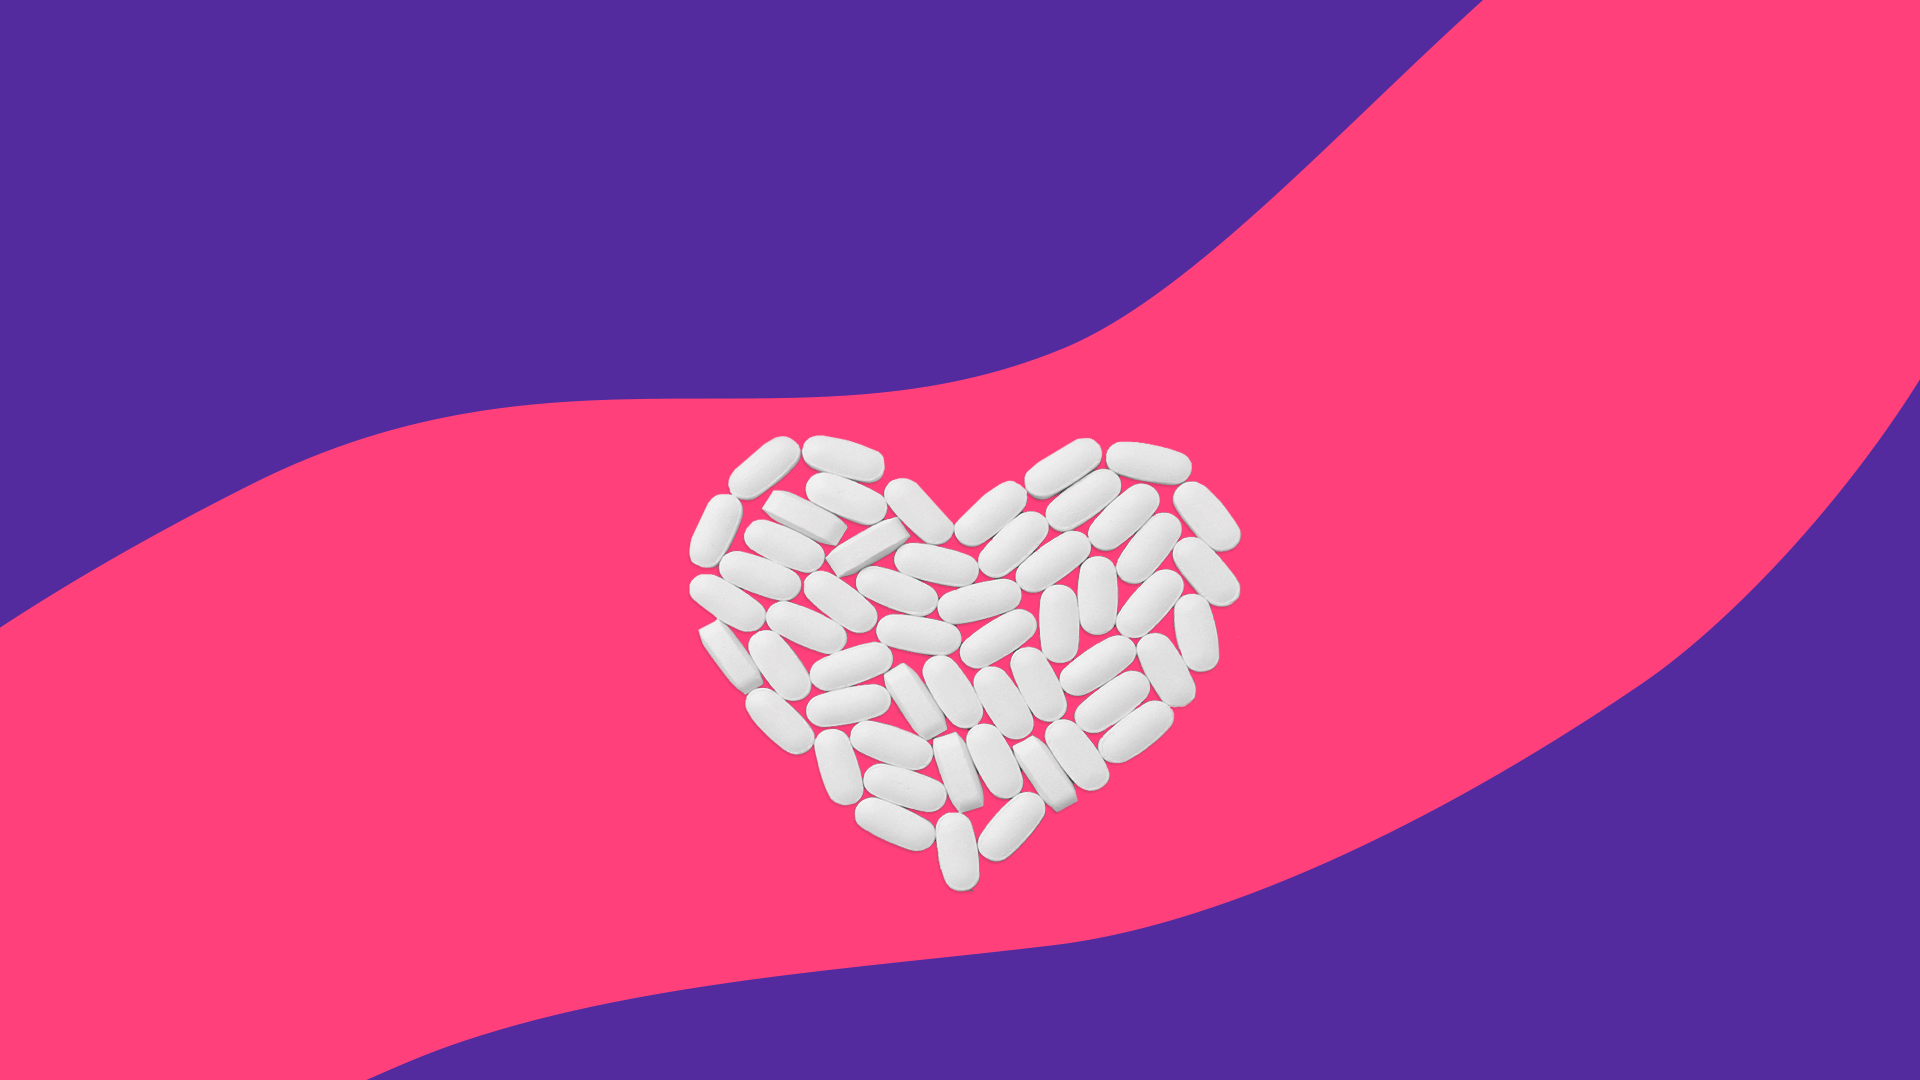 Pills in the shape of a heart represent the side effects of statins